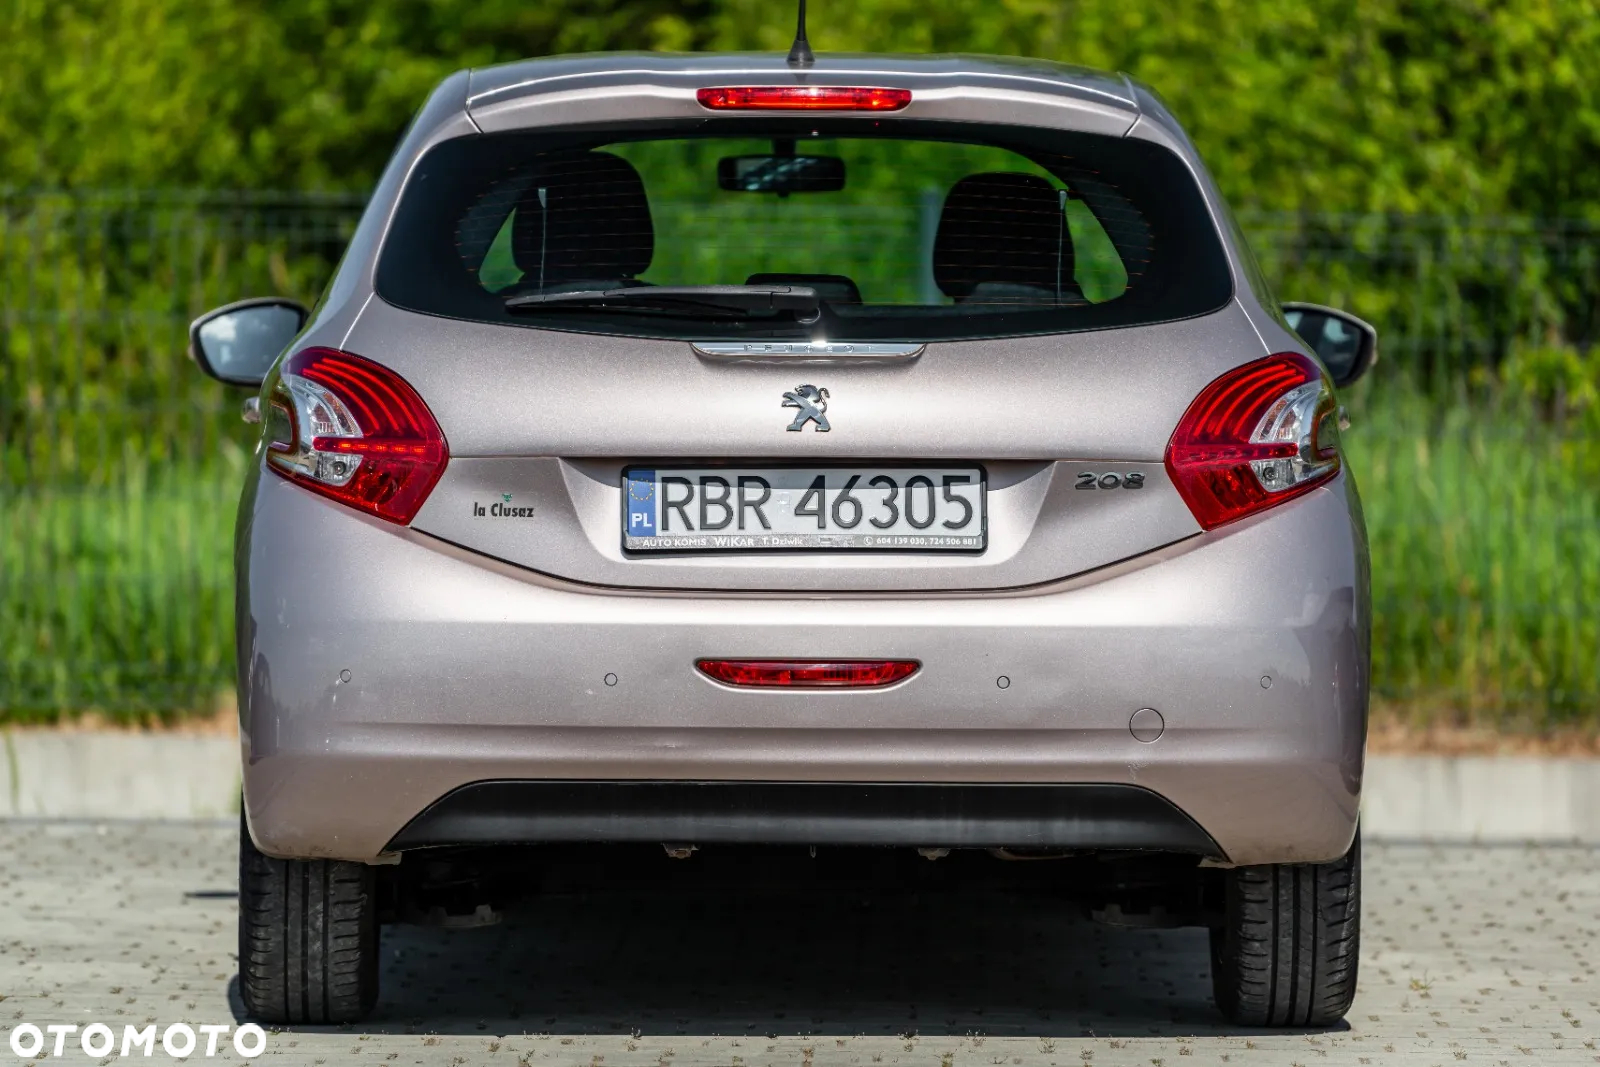 Peugeot 208 1.4 HDi Business Line - 3